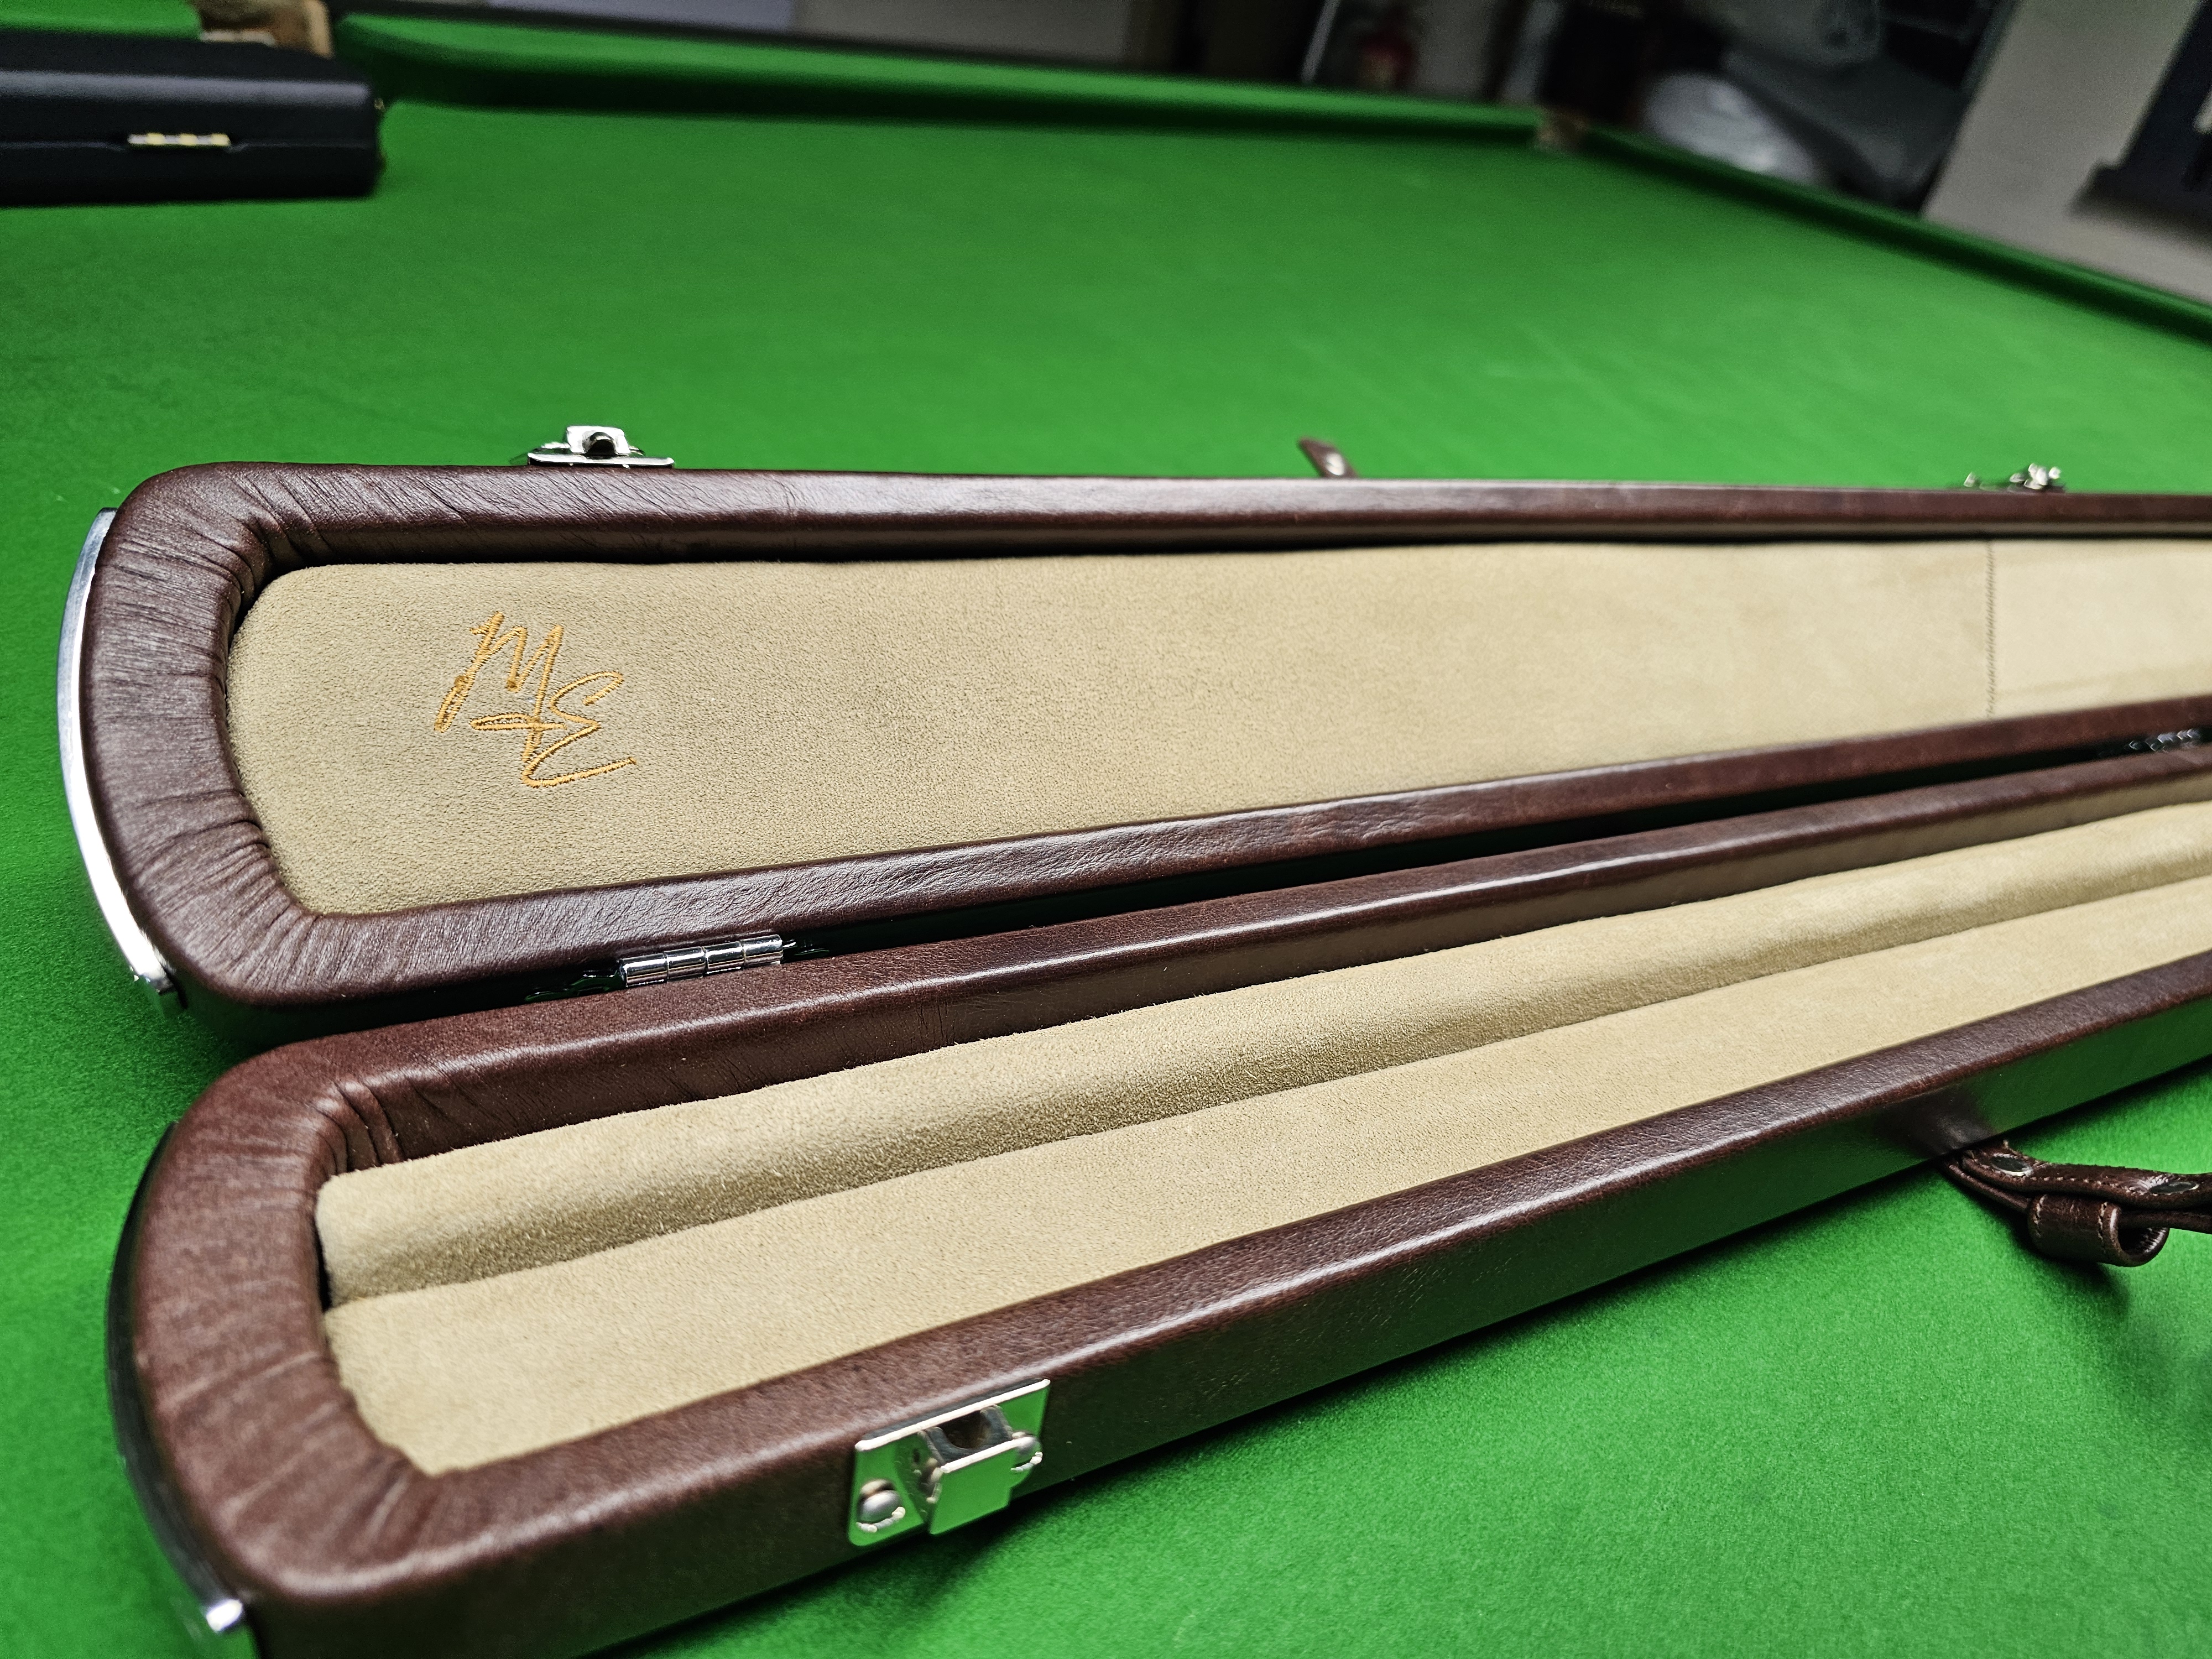 Bespoke made for Dean Jones Cues, one of the most prestigious and respected cue makers in the world.